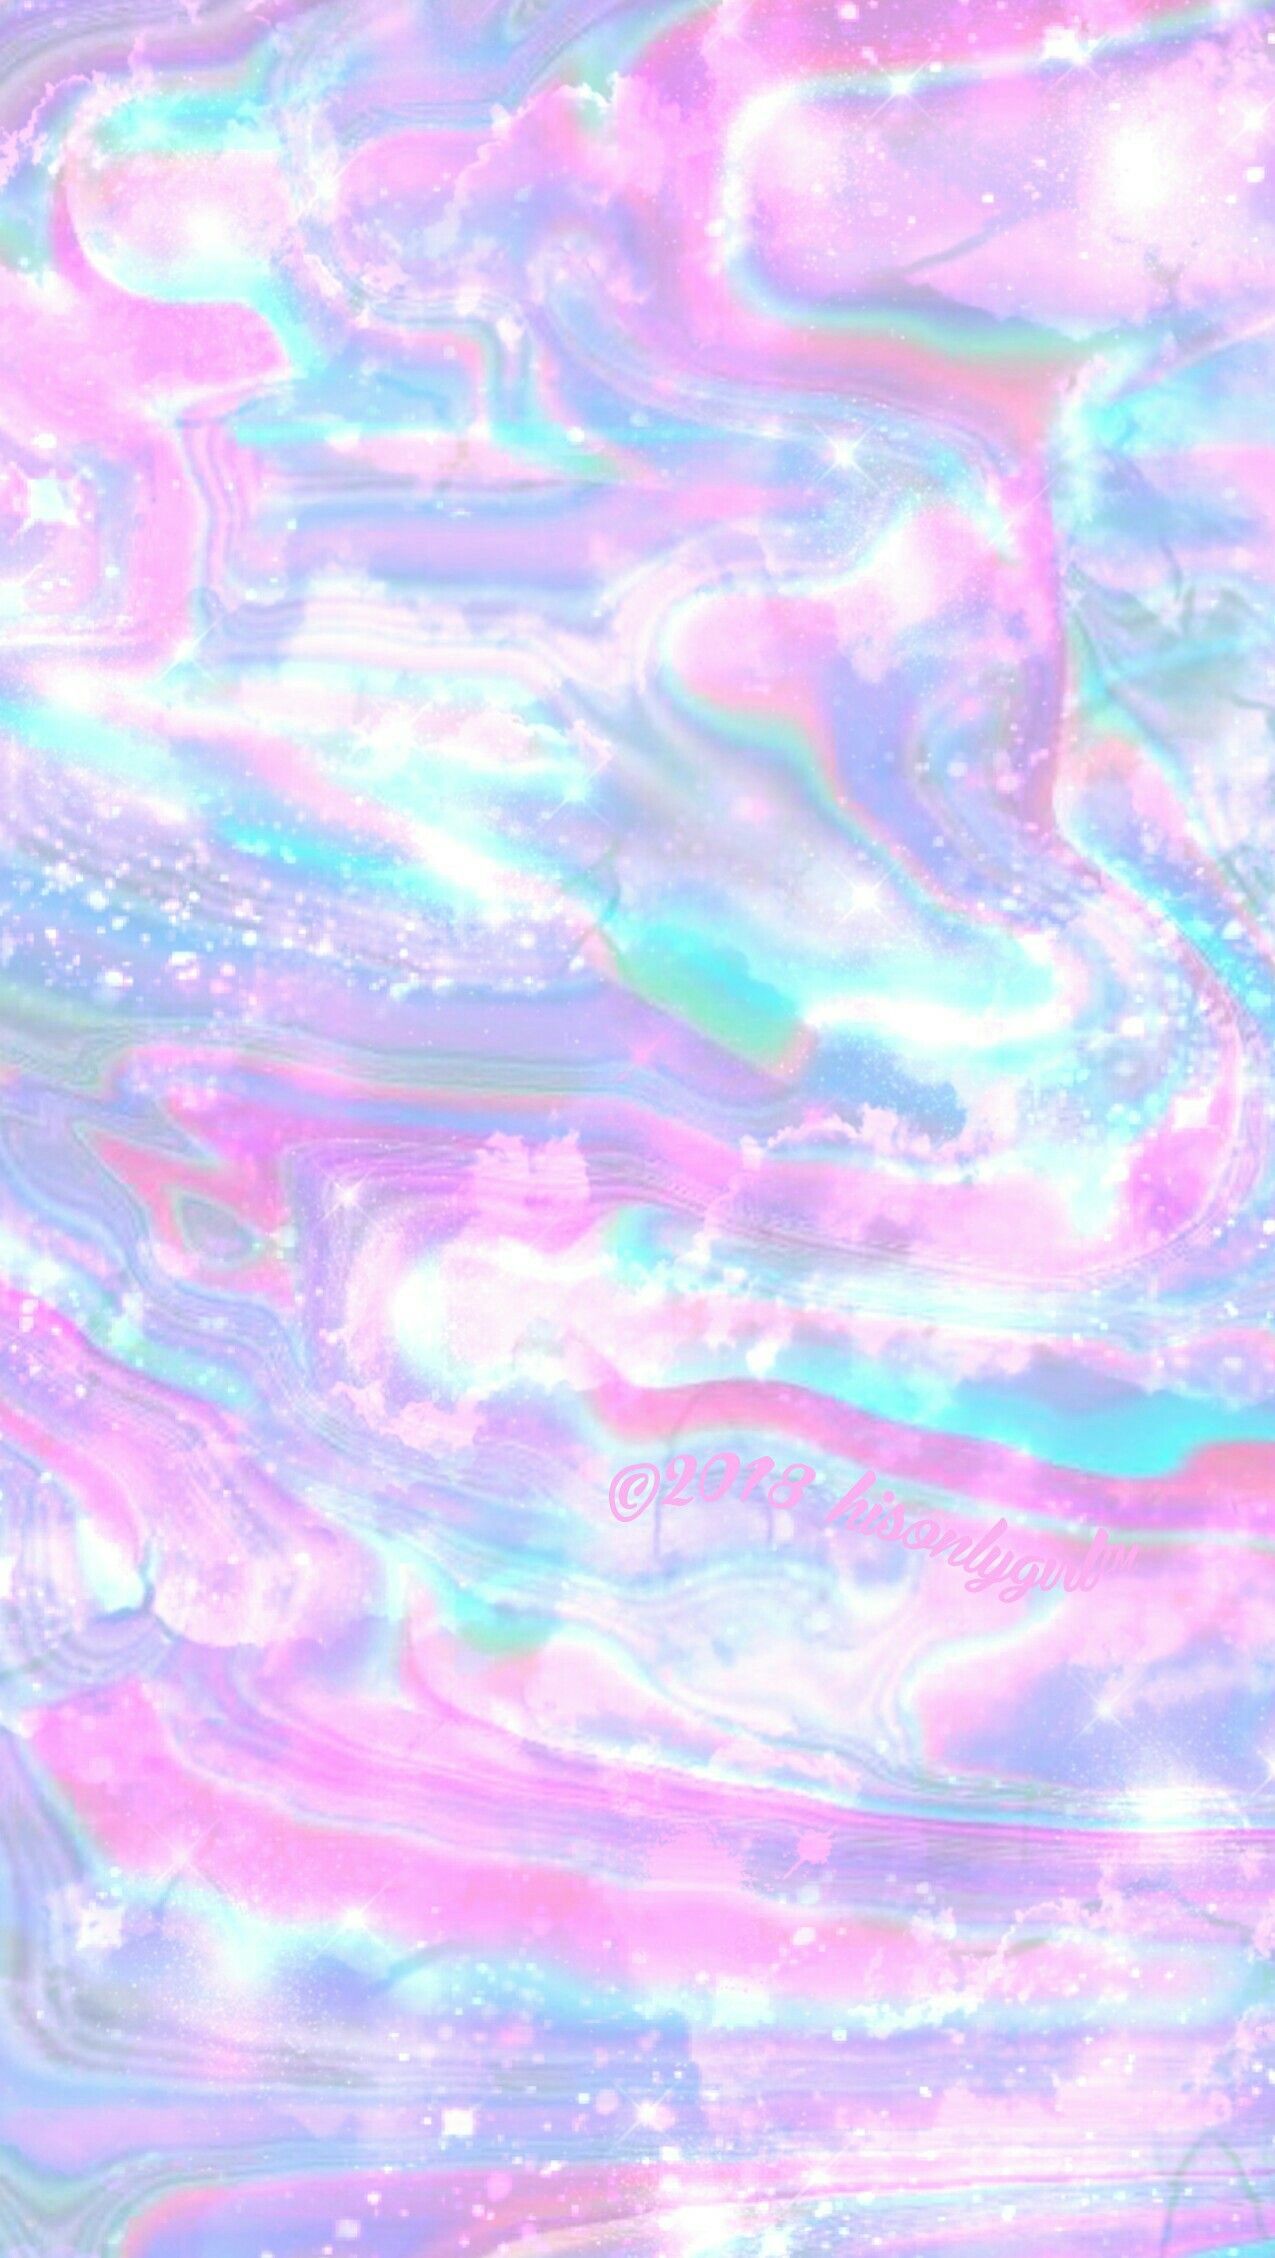 Pastel pool time galaxy iPhone /Android wallpaper I created